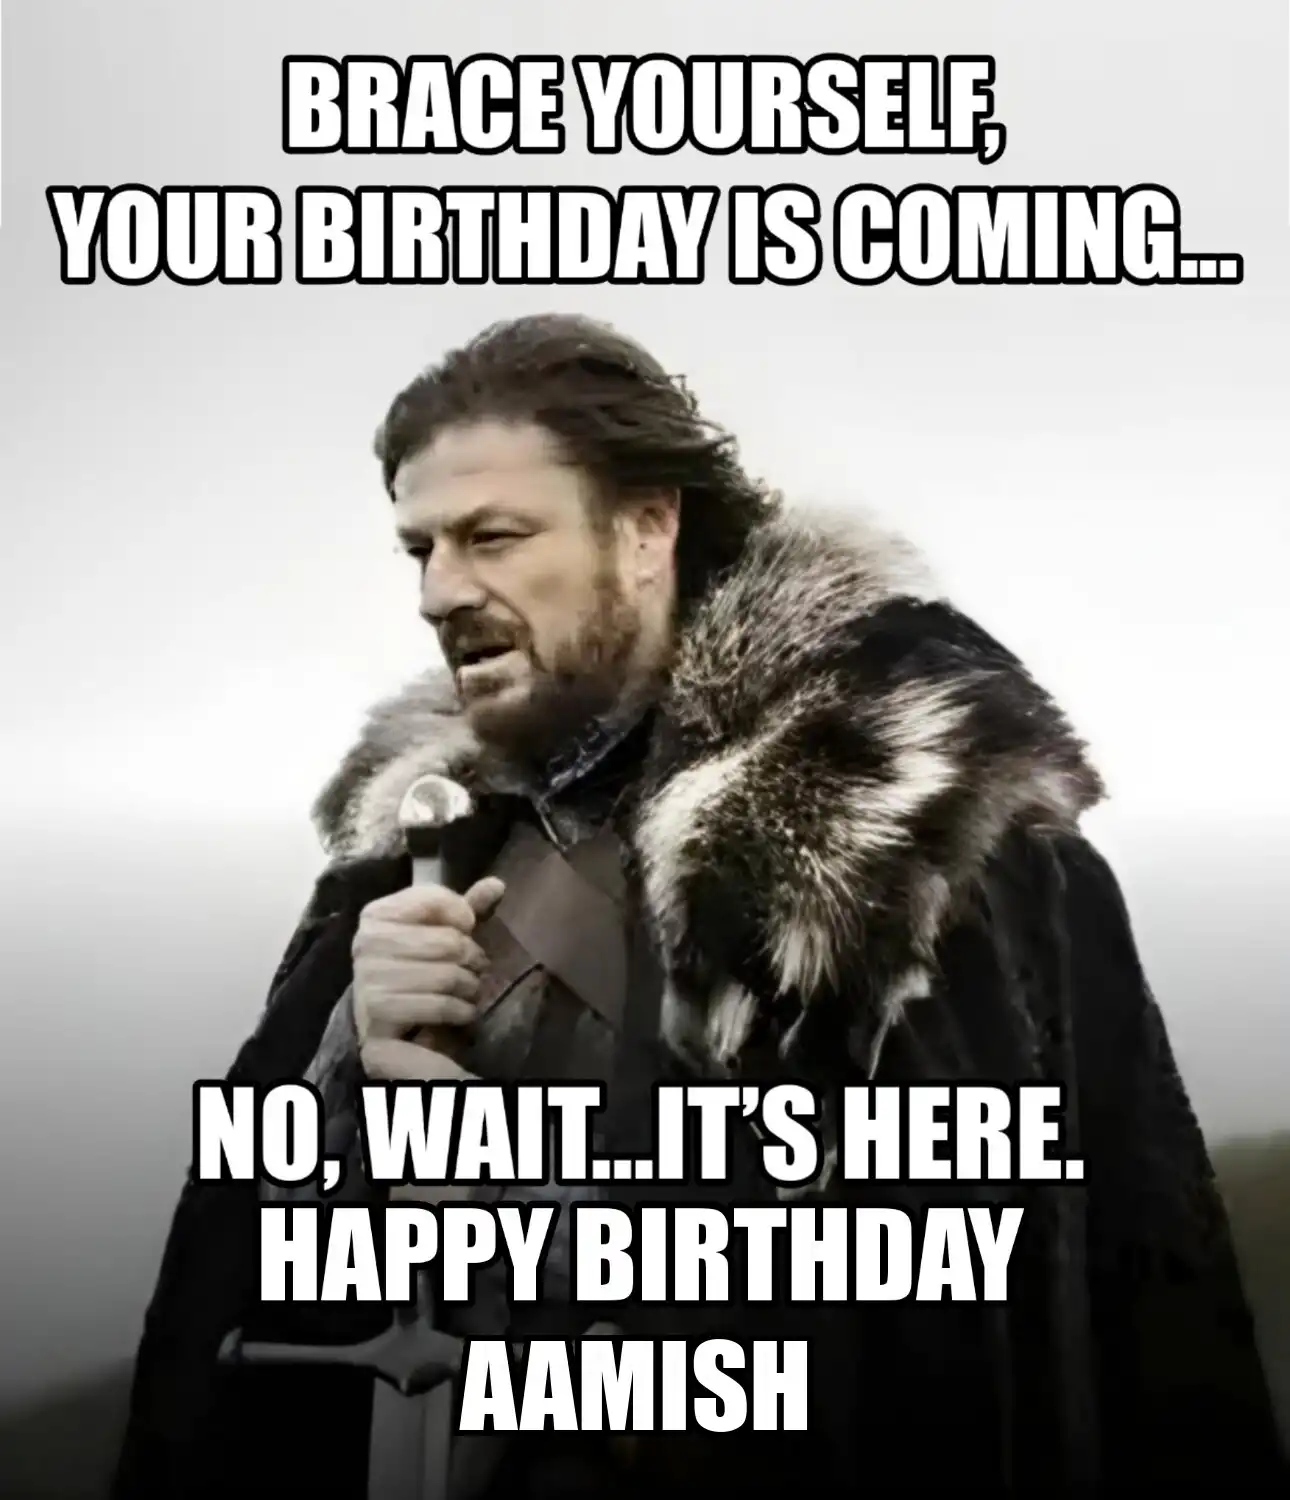 Happy Birthday Aamish Brace Yourself Your Birthday Is Coming Meme